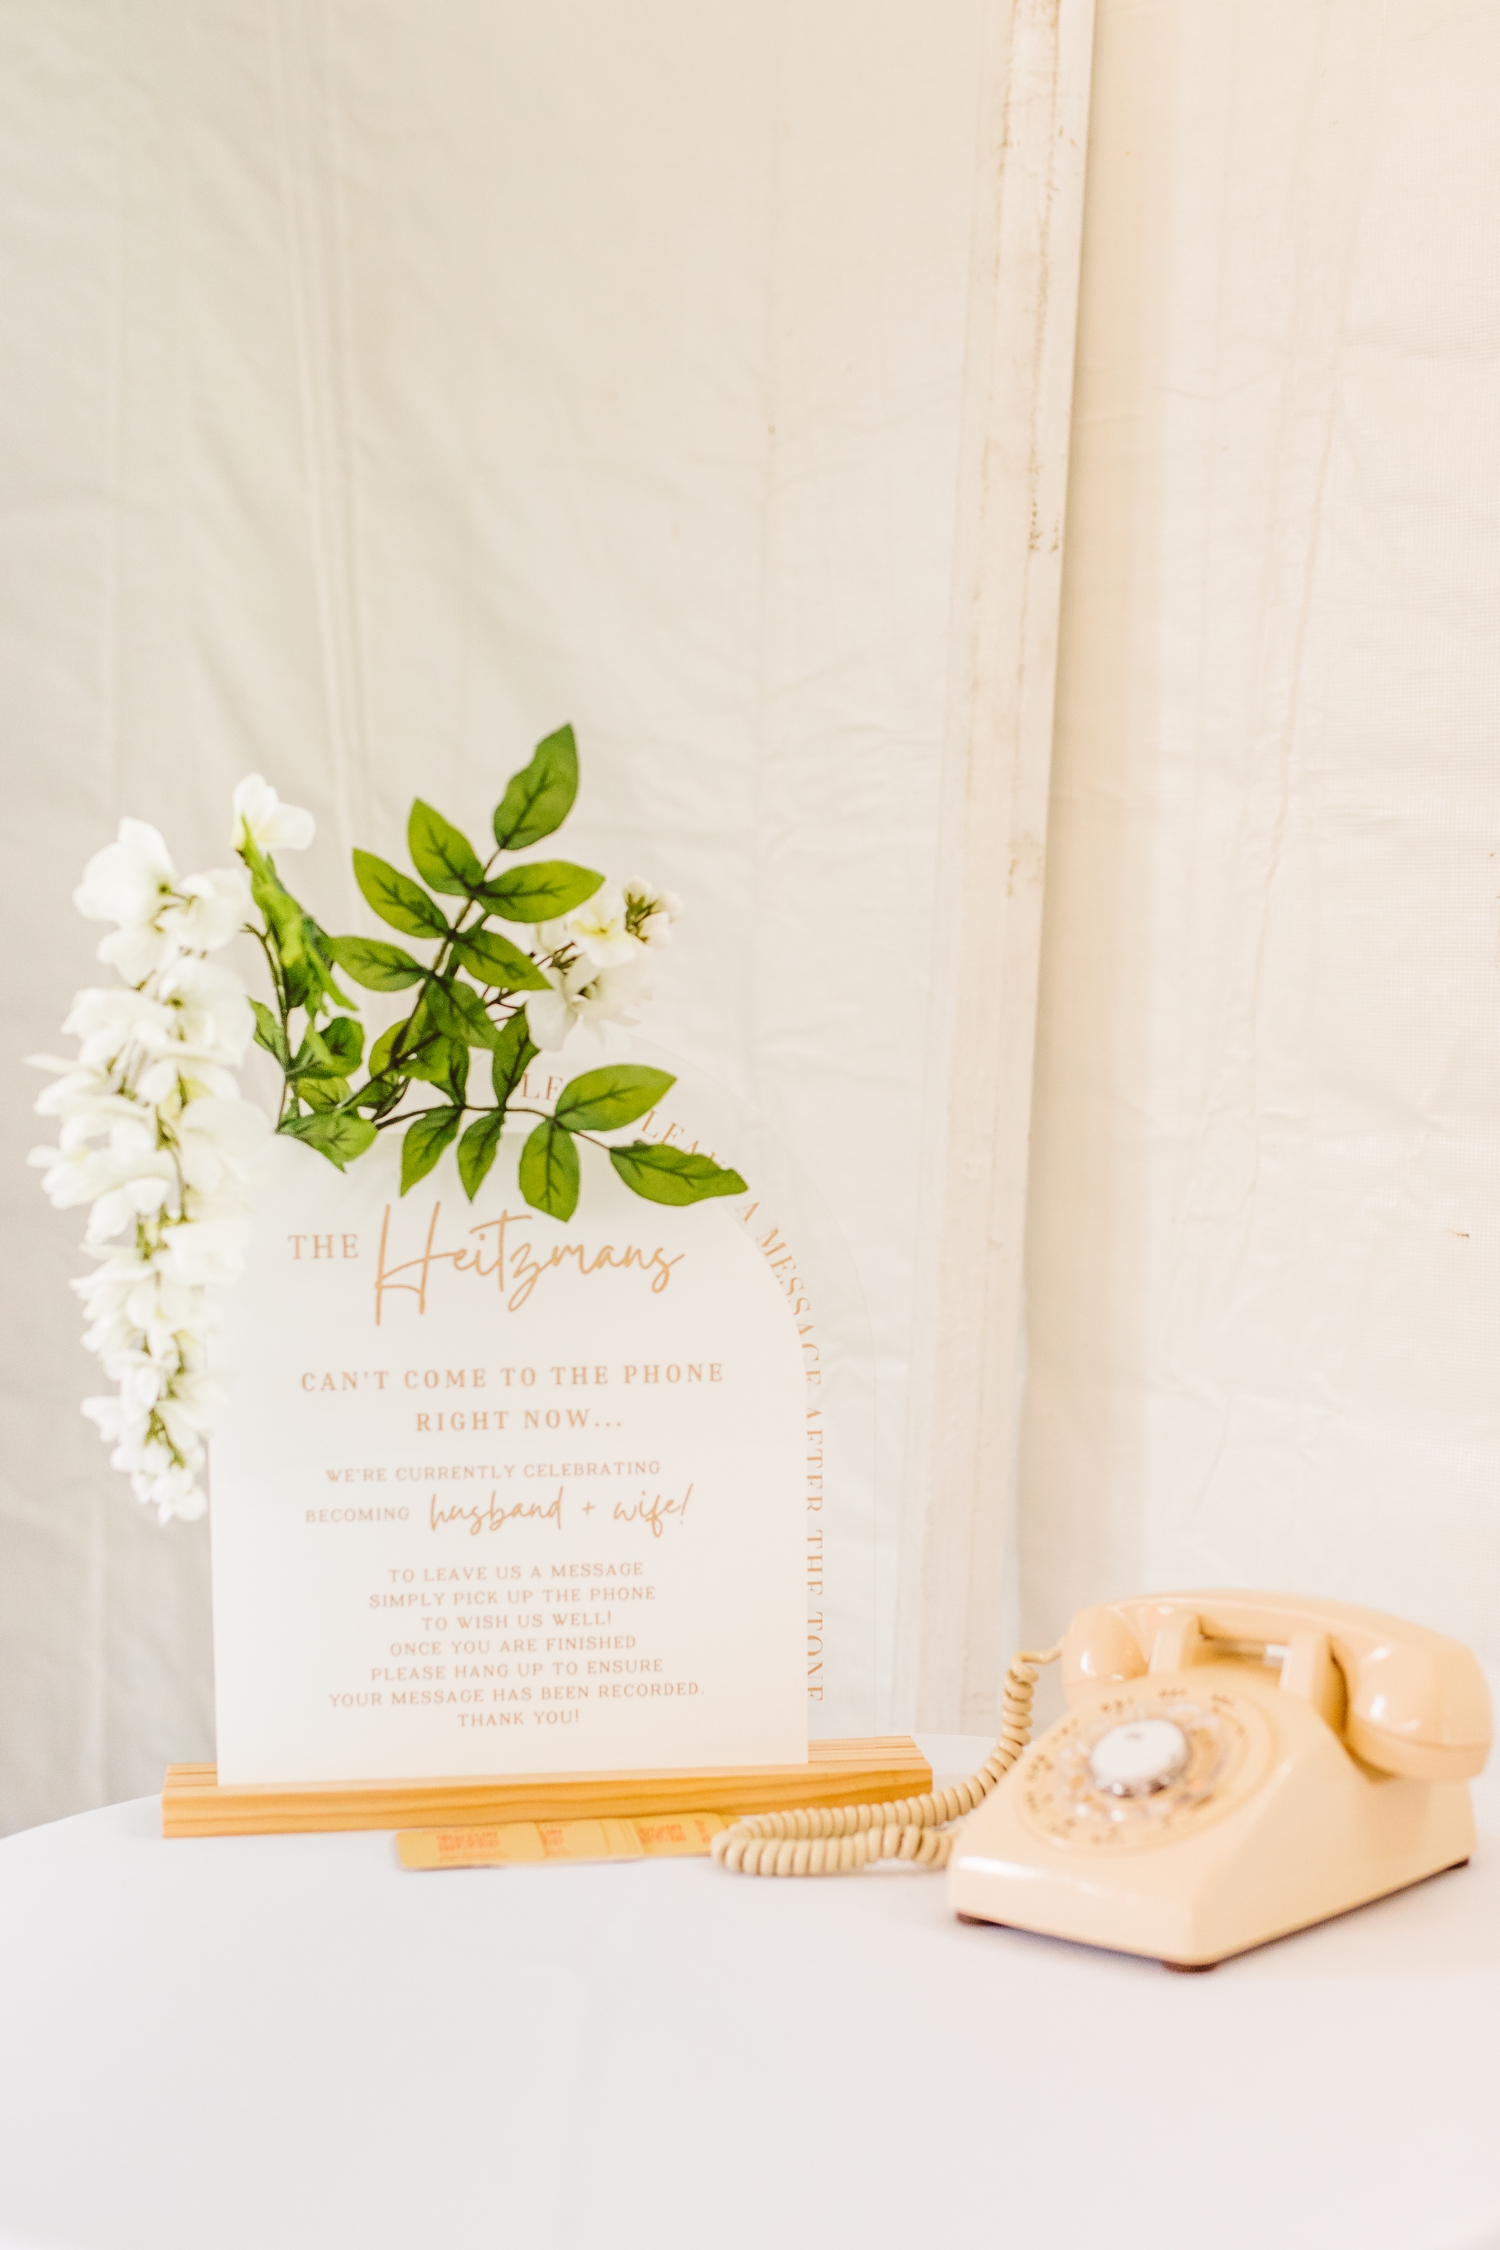 Vintage telephone for guests to leave messages for guests | Brooke Michelle Photo